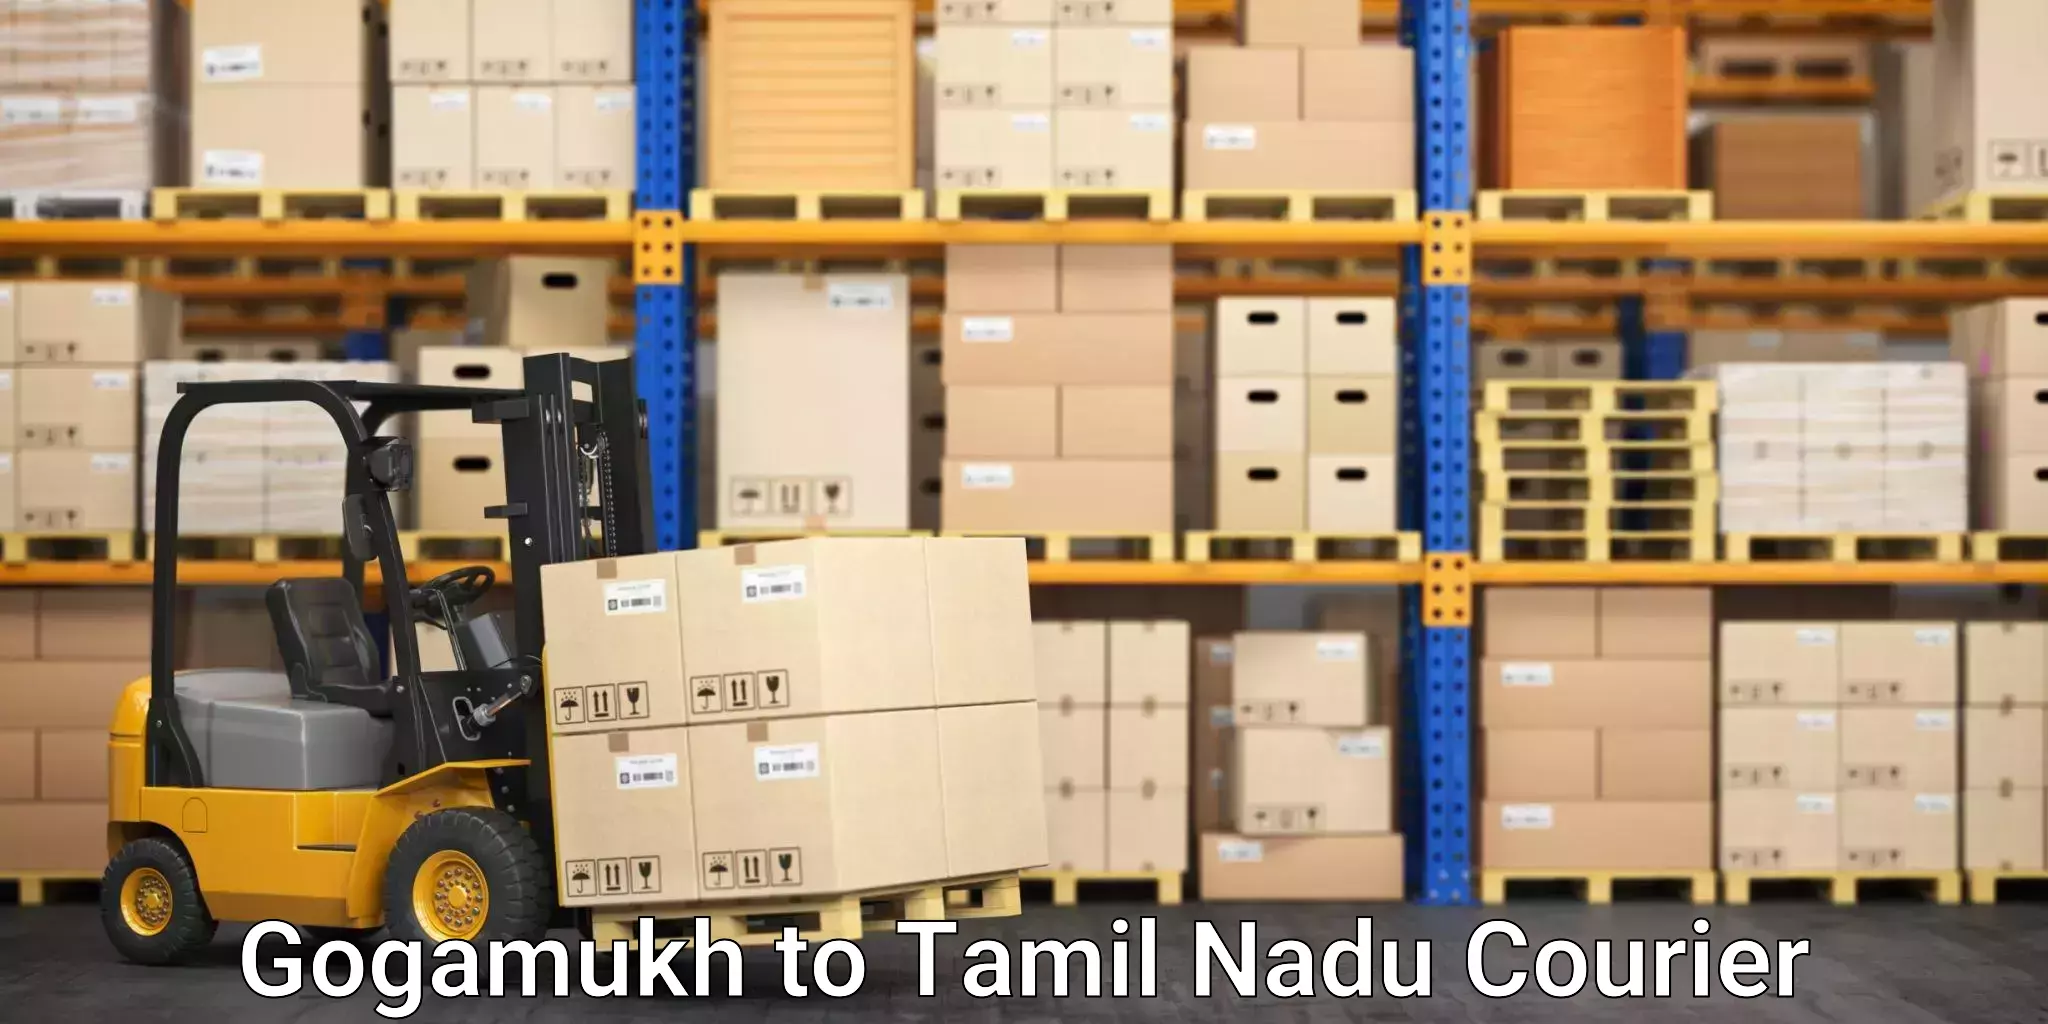 Long distance courier Gogamukh to Ennore Port Chennai